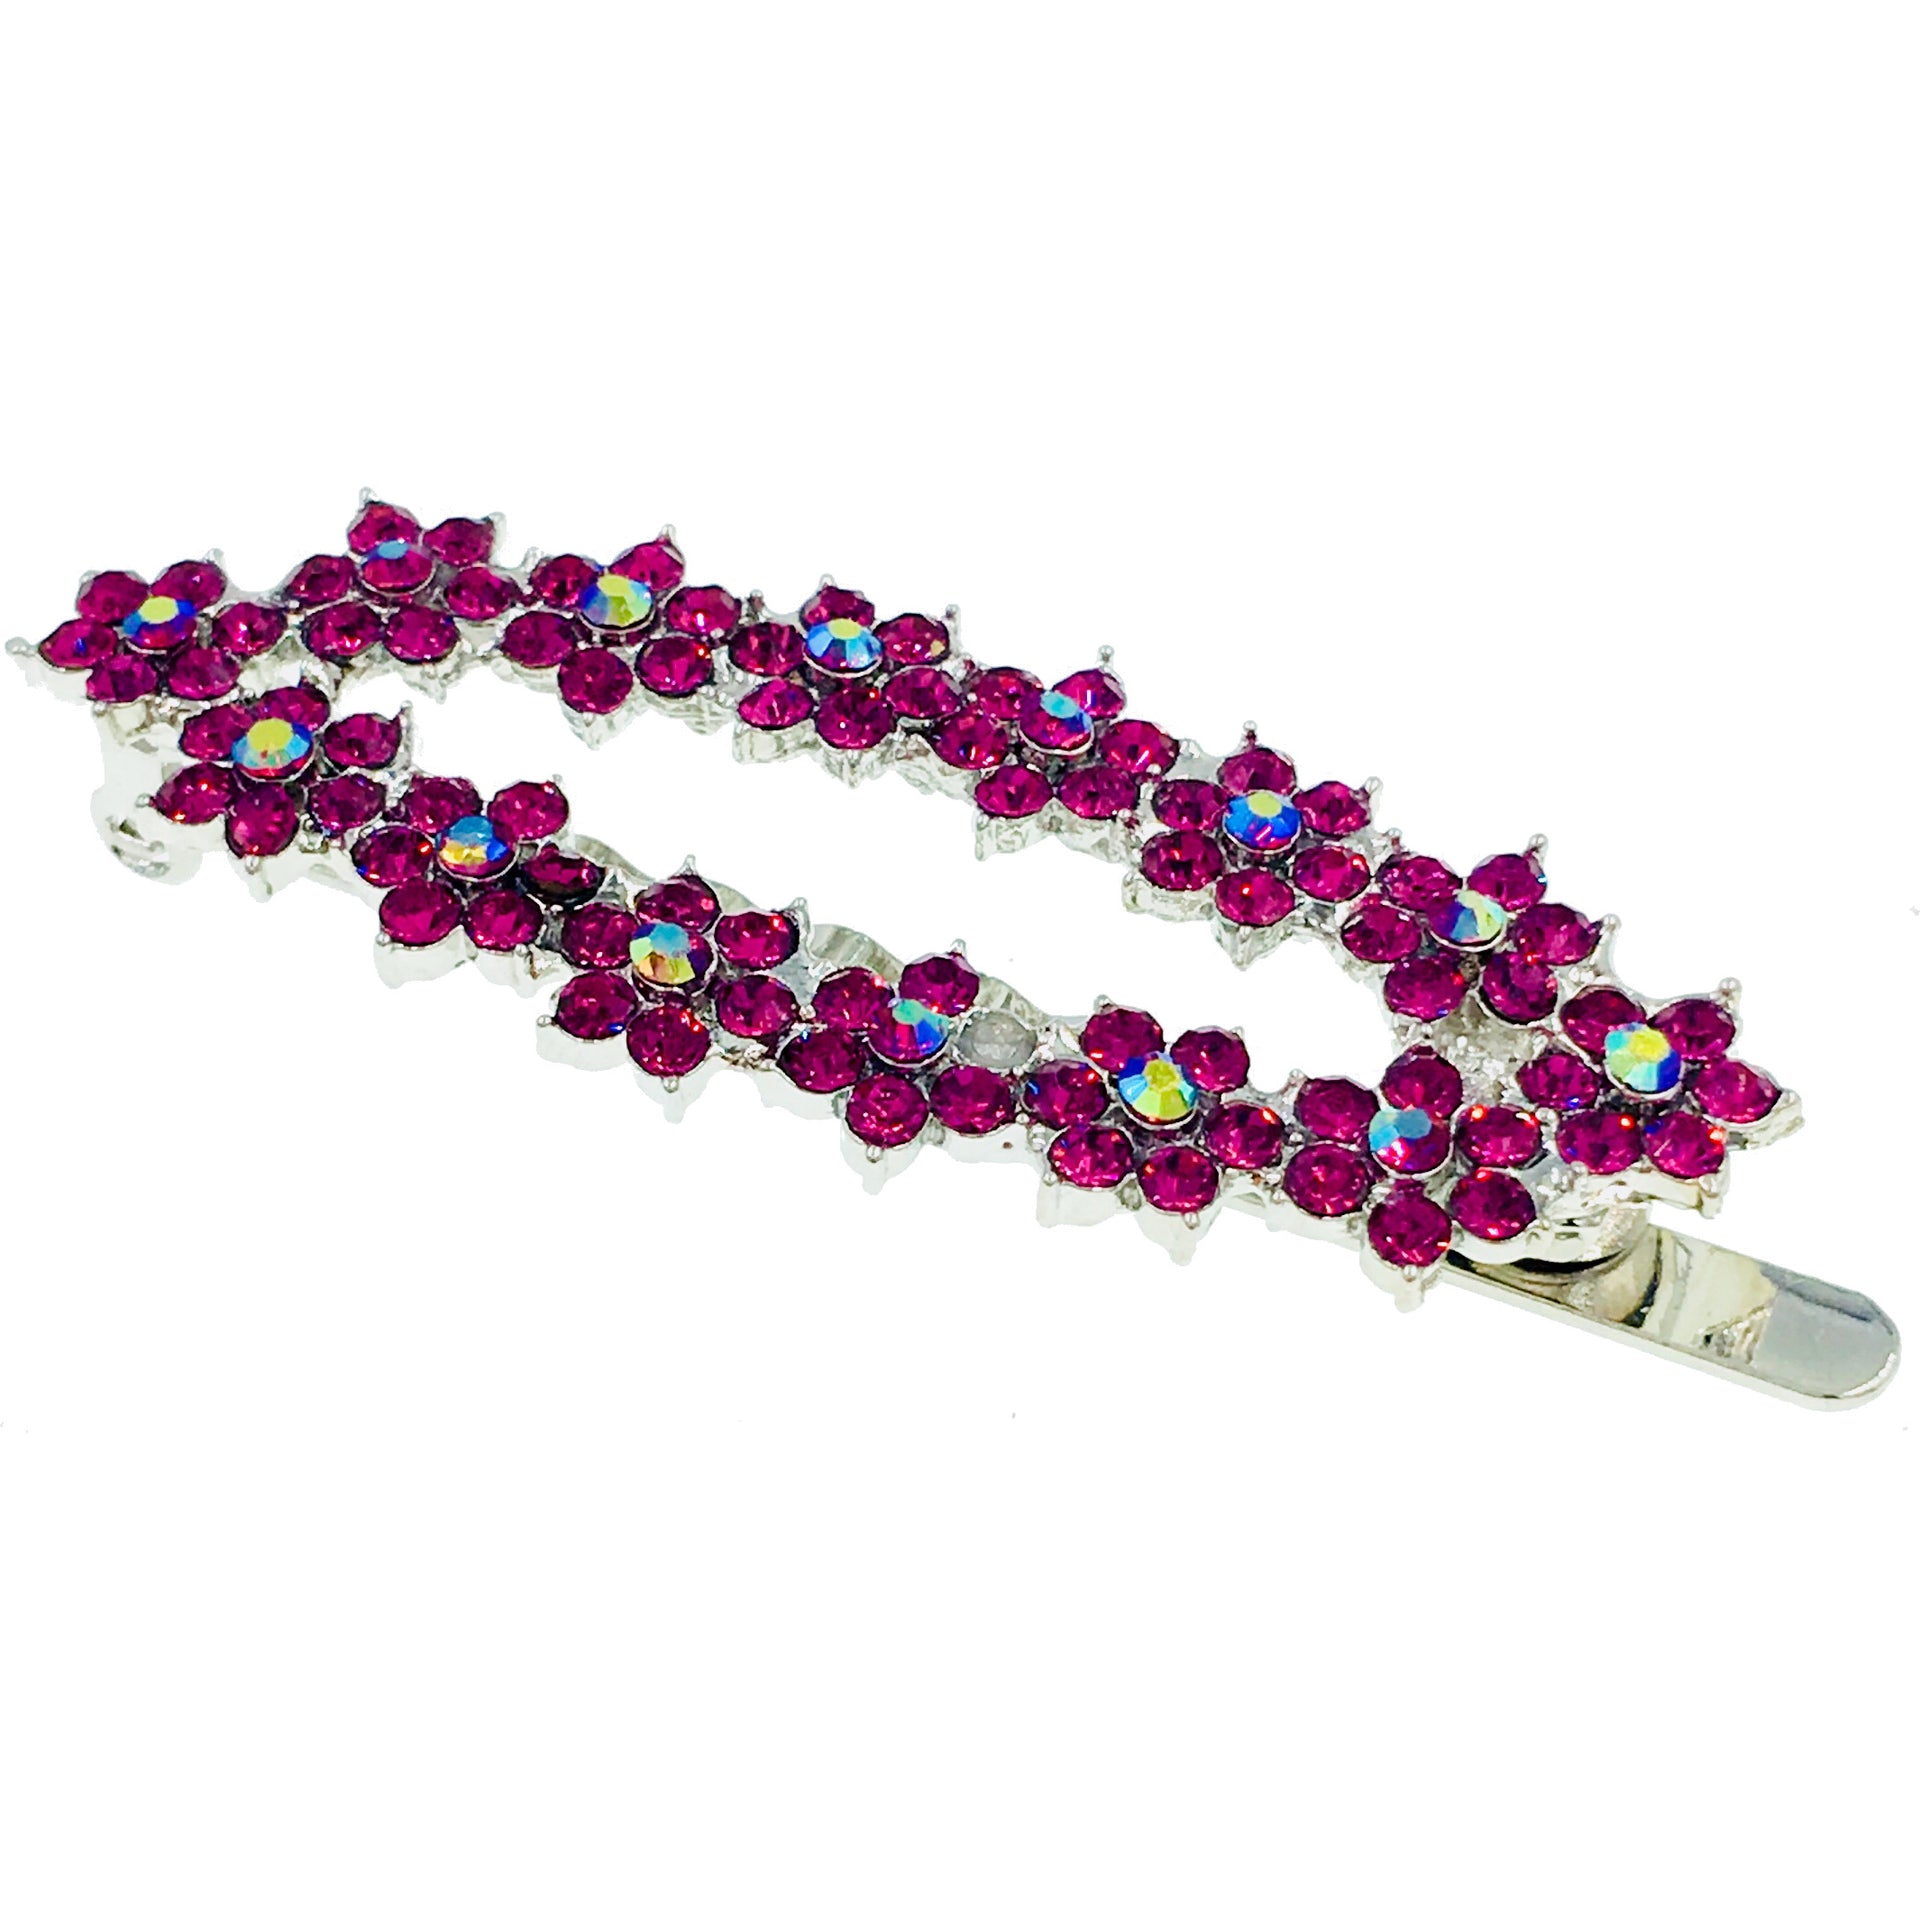 Elongated Oval Bouquet Magnetic Hair Clip Rhinestone Crystal silver base Pink Red Purple Blue Green Gray Black Brown, Magnetic Clip - MOGHANT